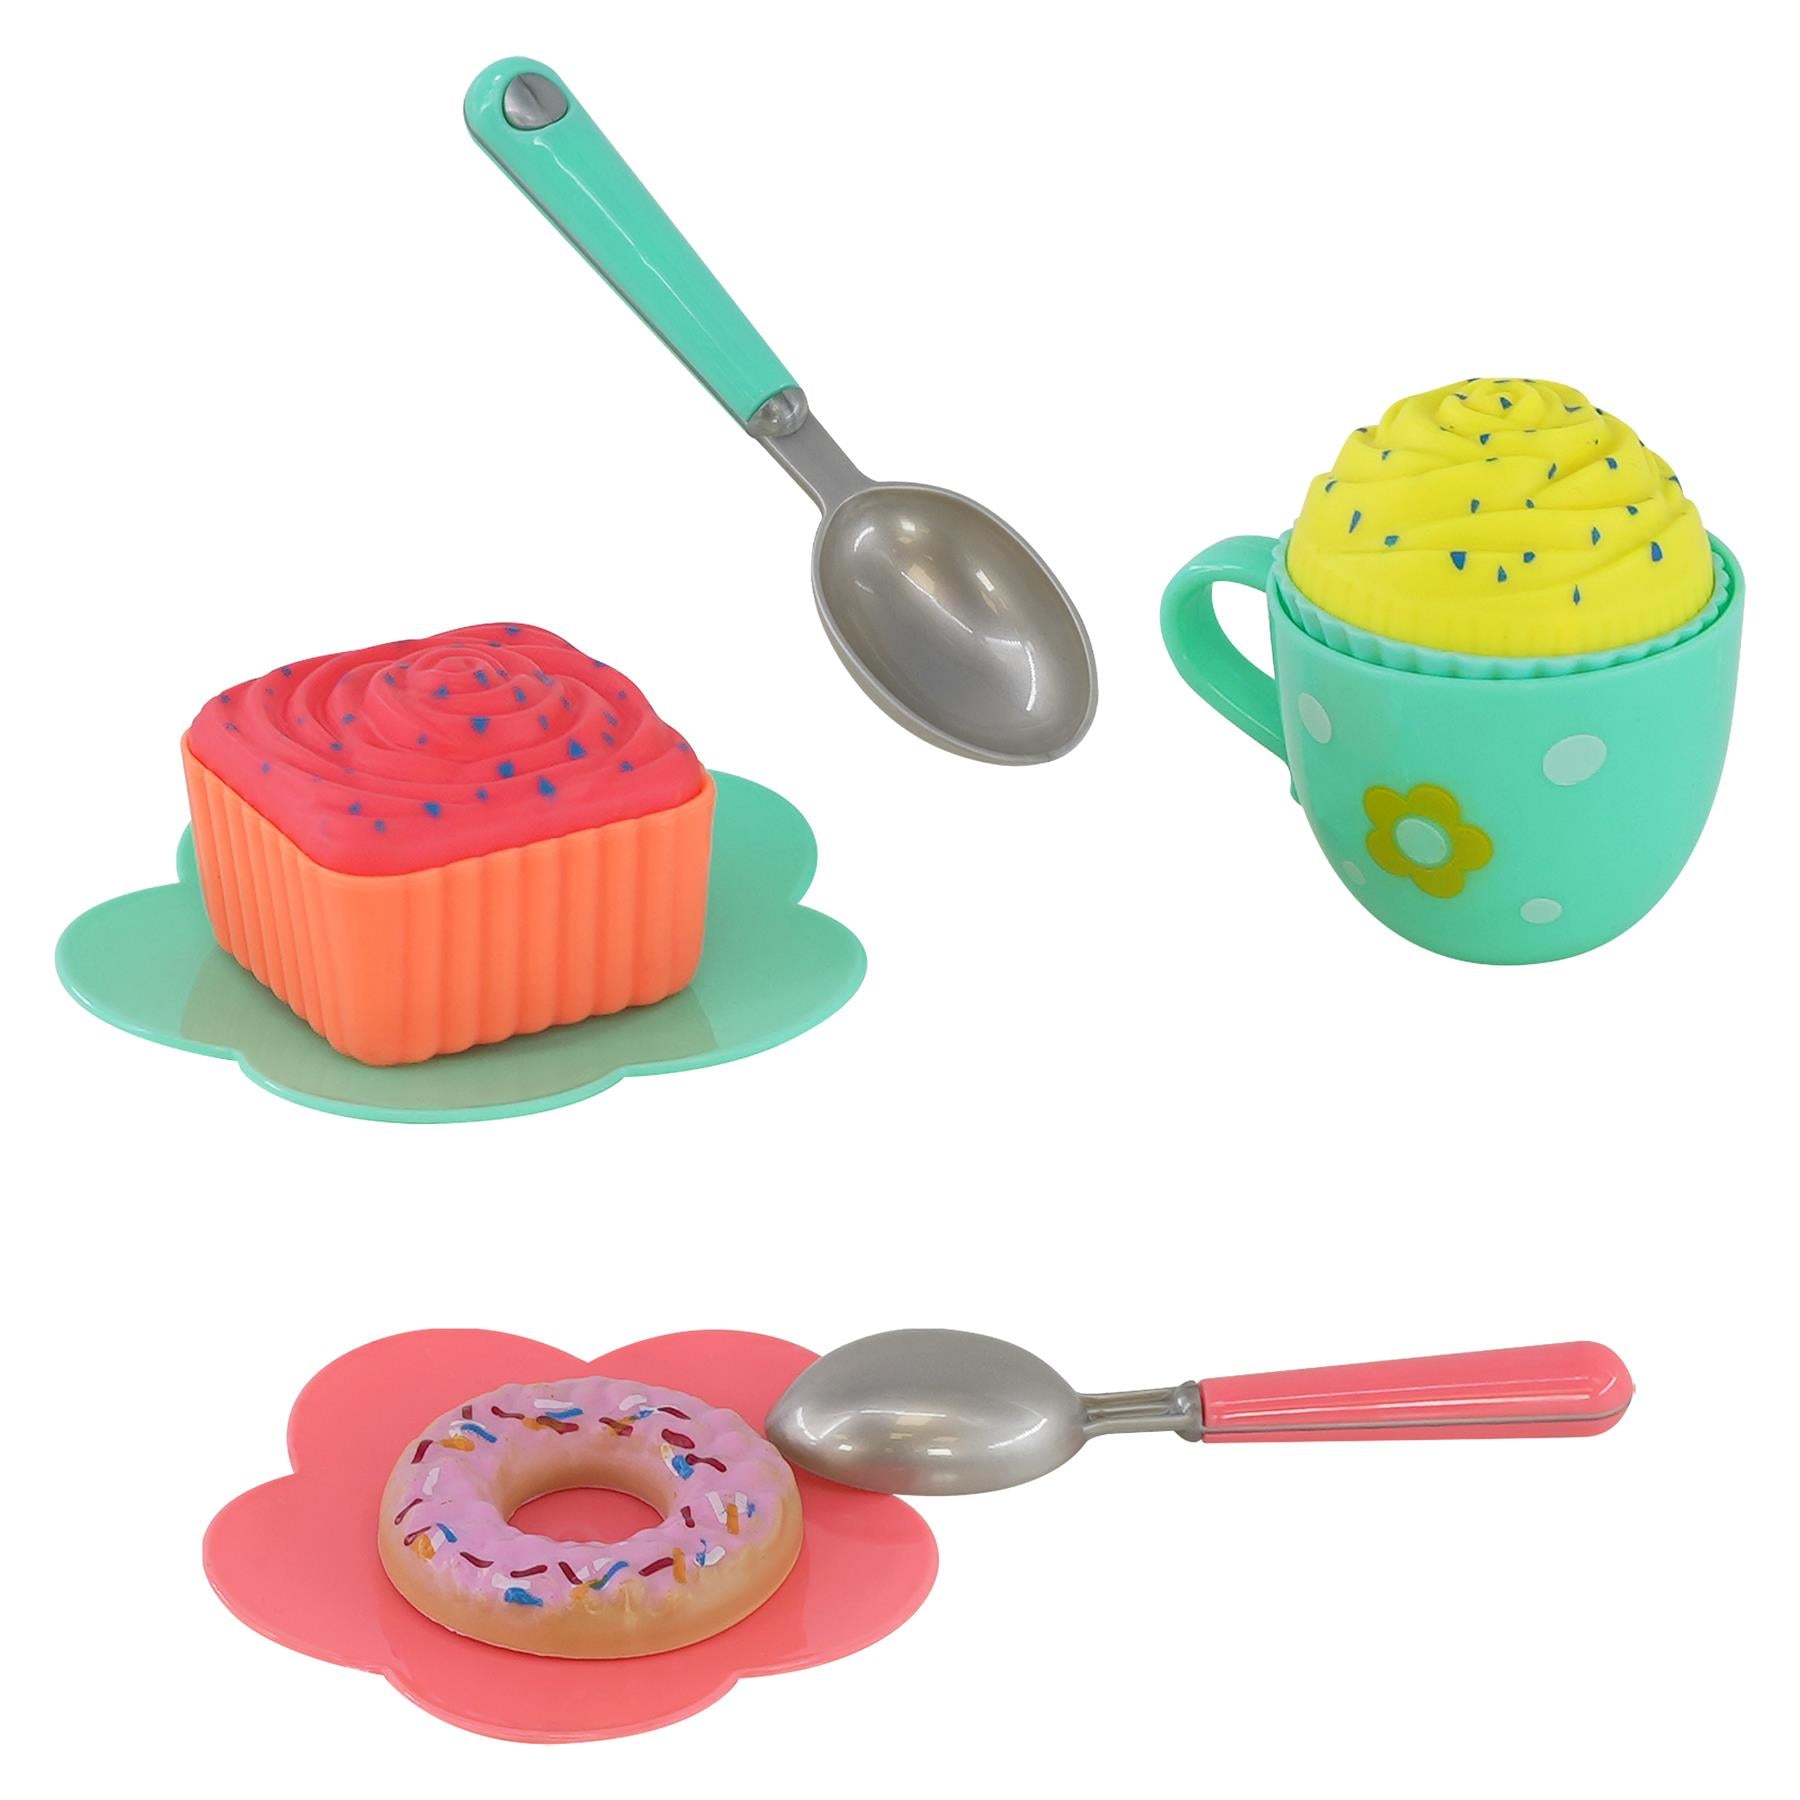 The Magic Toy Shop Toys and Games Children's Pretend Tea Playset